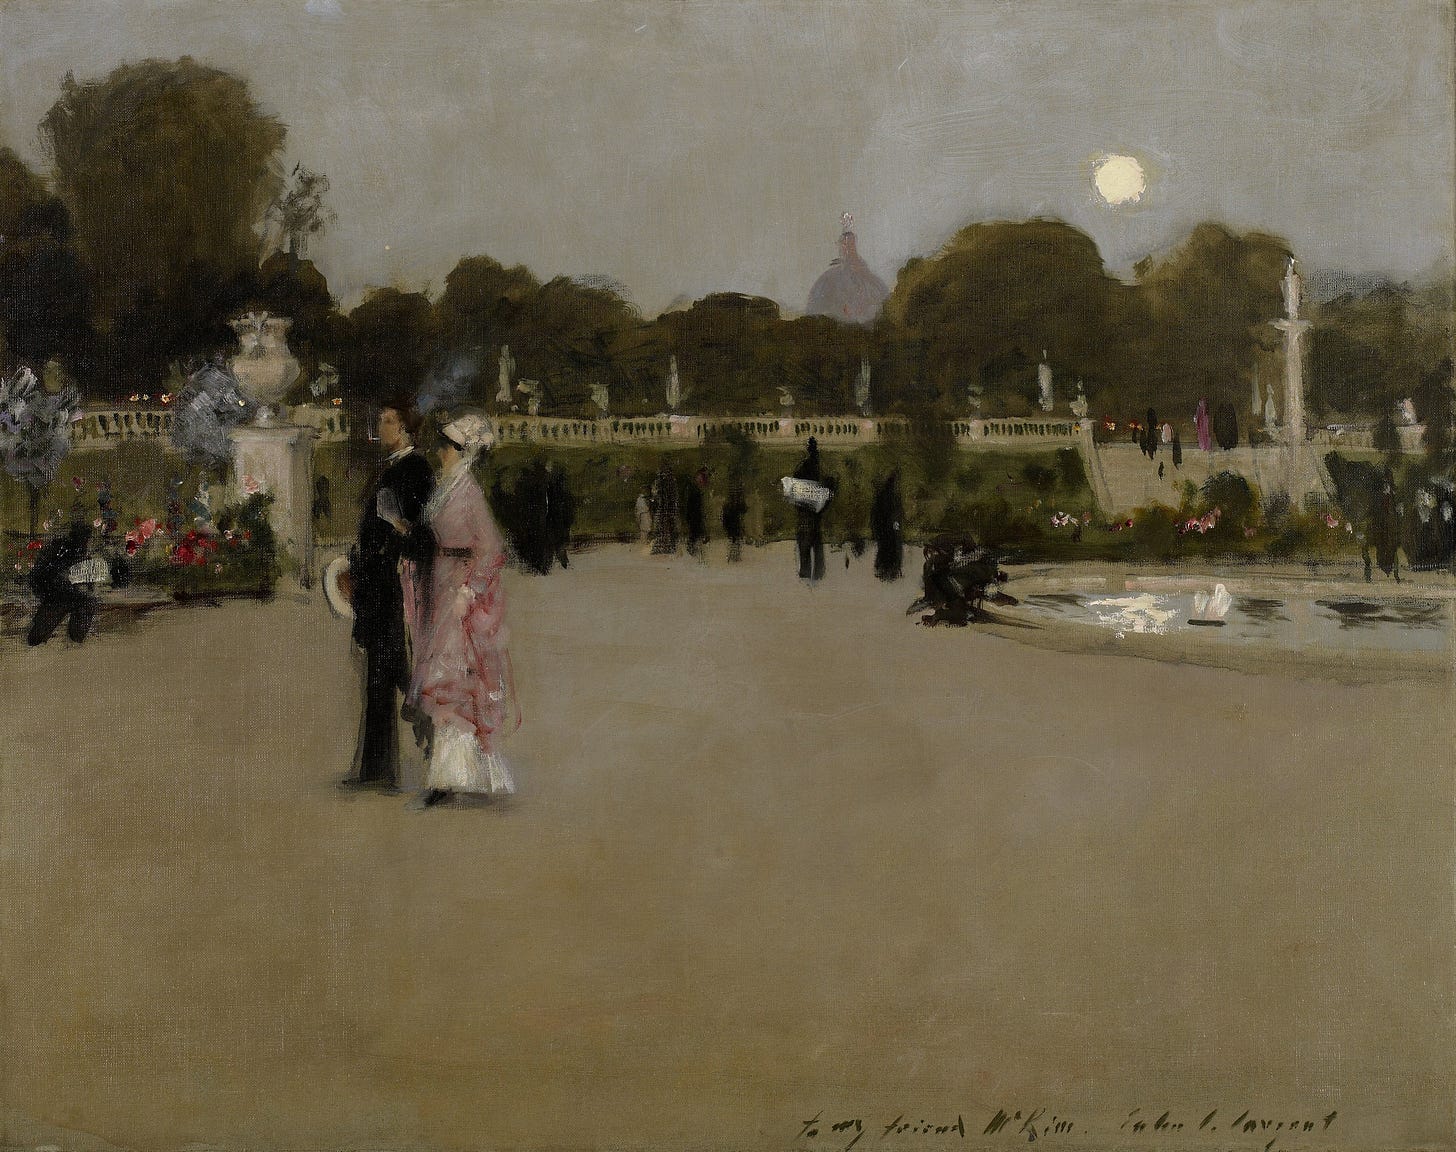 Luxembourg Gardens at Twilight (1879)